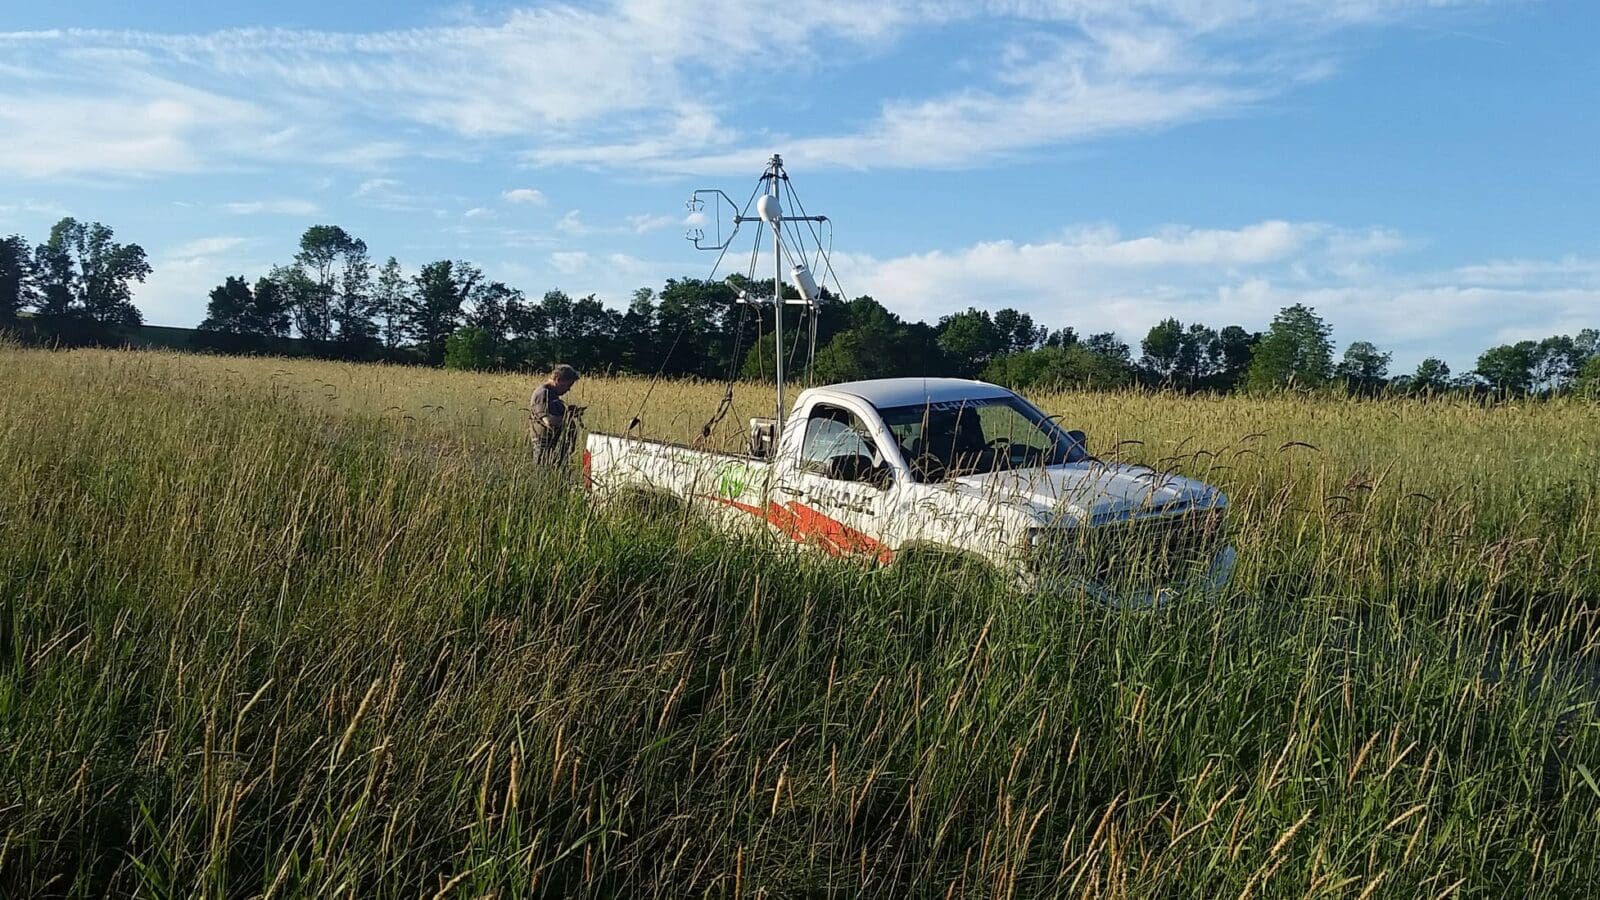 Pickup truck parked in middle of field of tall grass, tall piece of equipment in the bed of track, researcher standing behind the truck. Row of trees and open sky in the background.